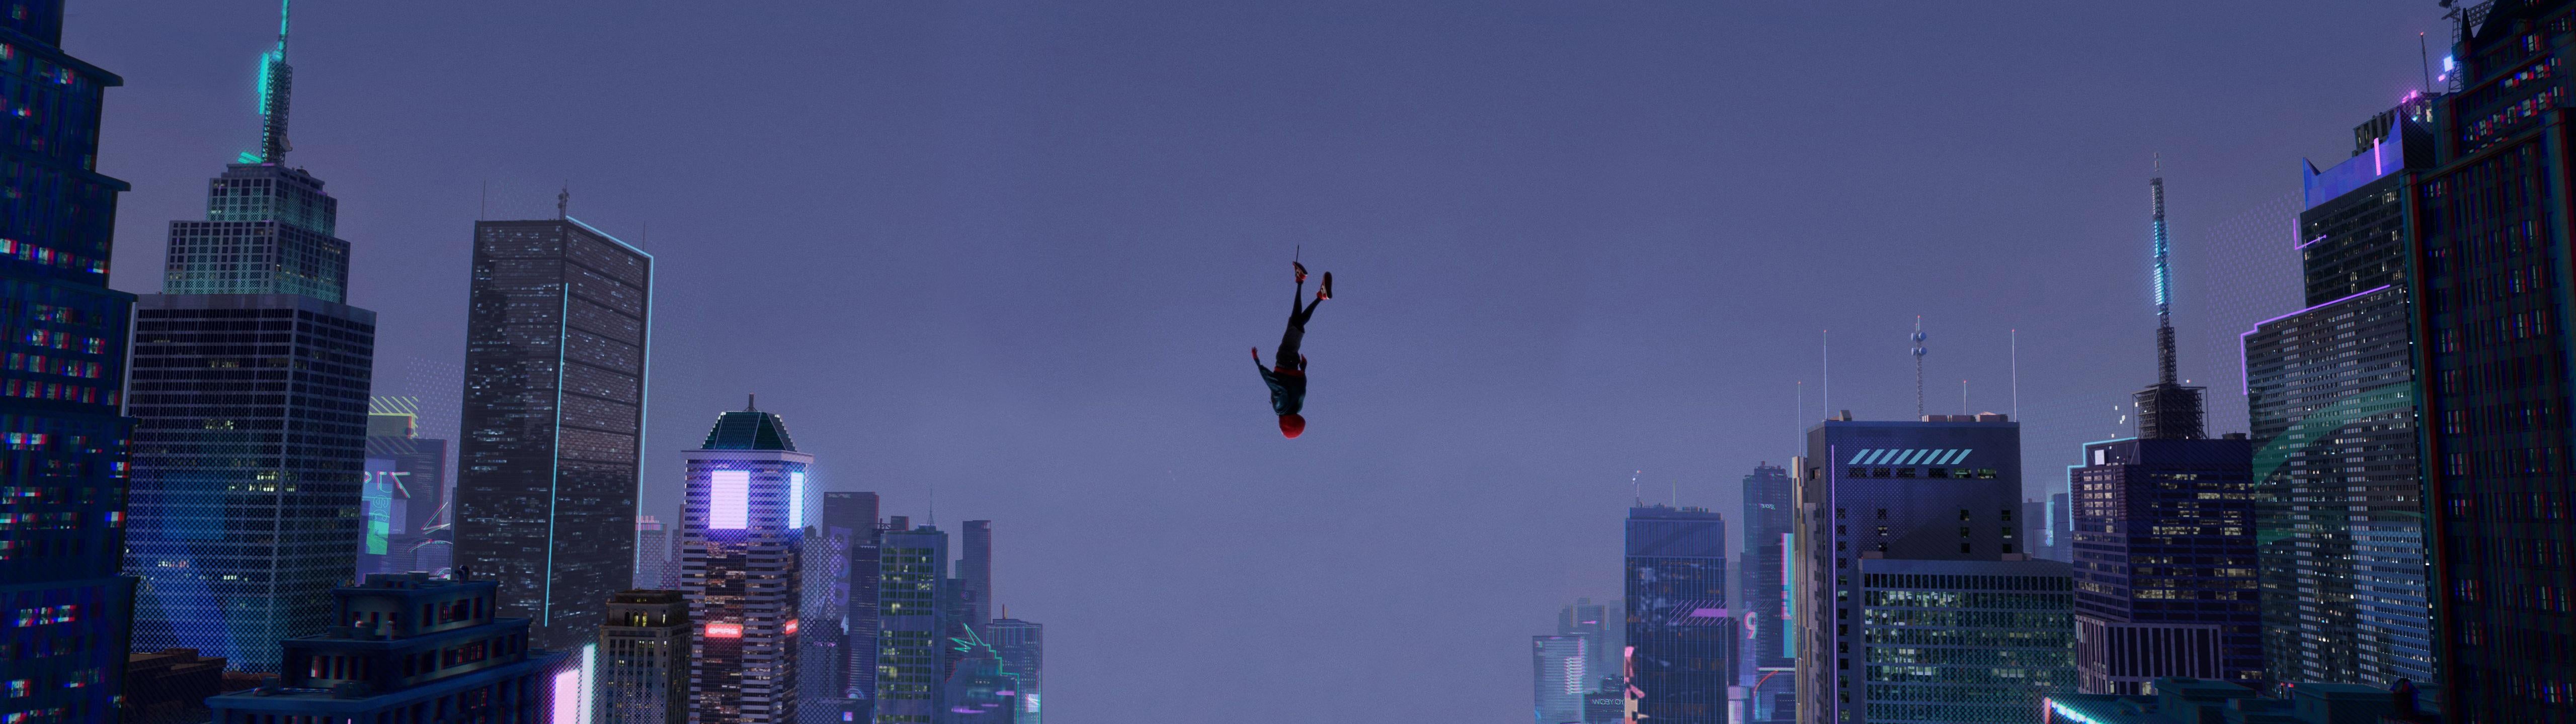 Request 5760x1080 Anything Cool You Can Share From Spider Man: Into The Spider Verse?